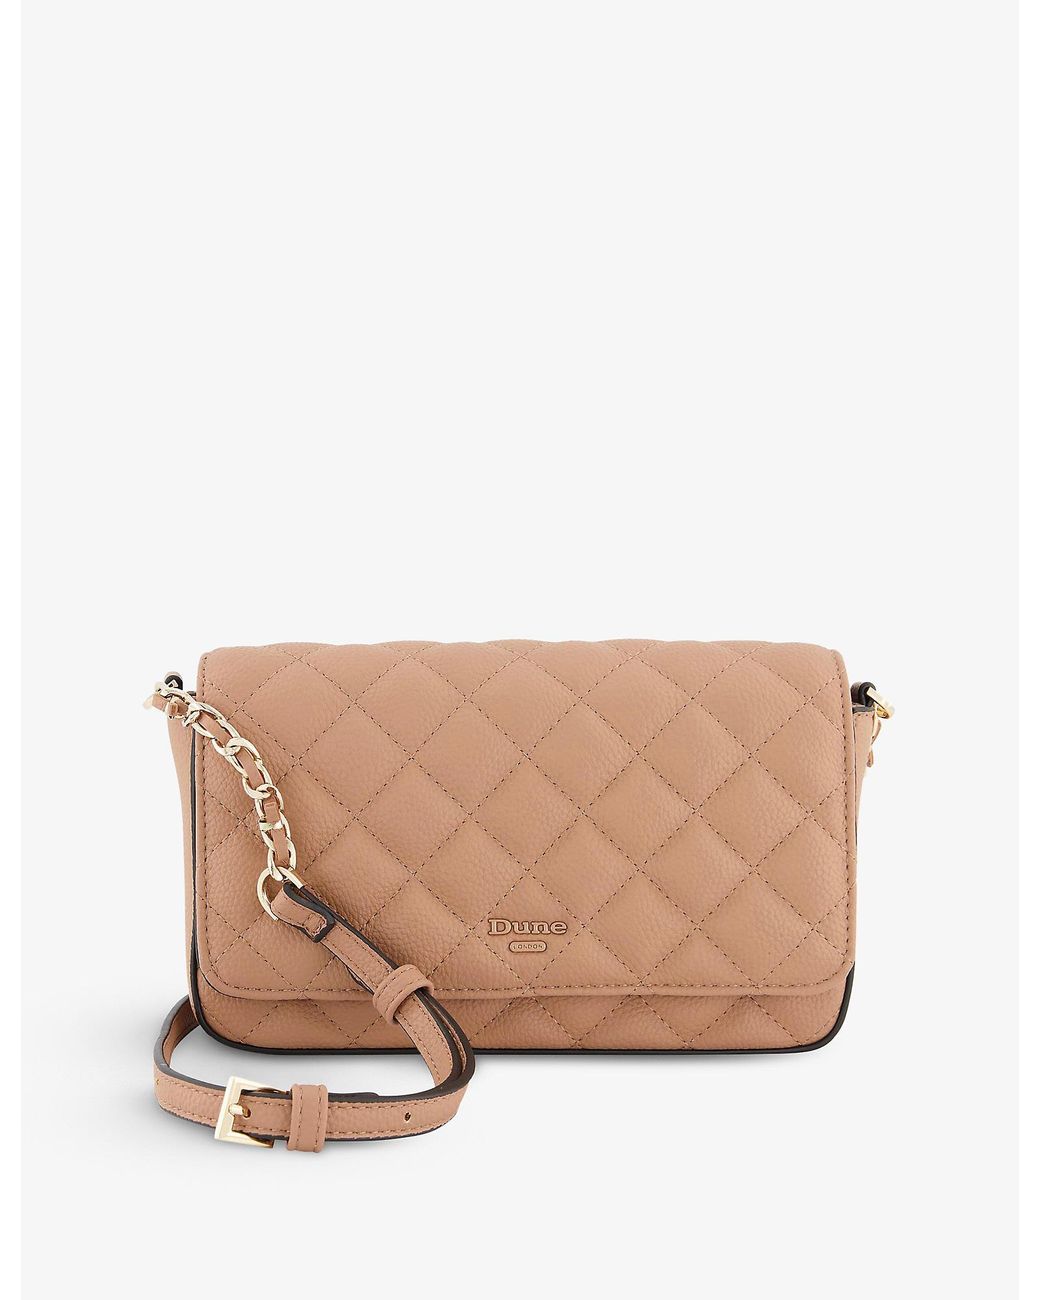 Dune Dupree Quilted Faux-leather Cross-body Bag in Natural | Lyst